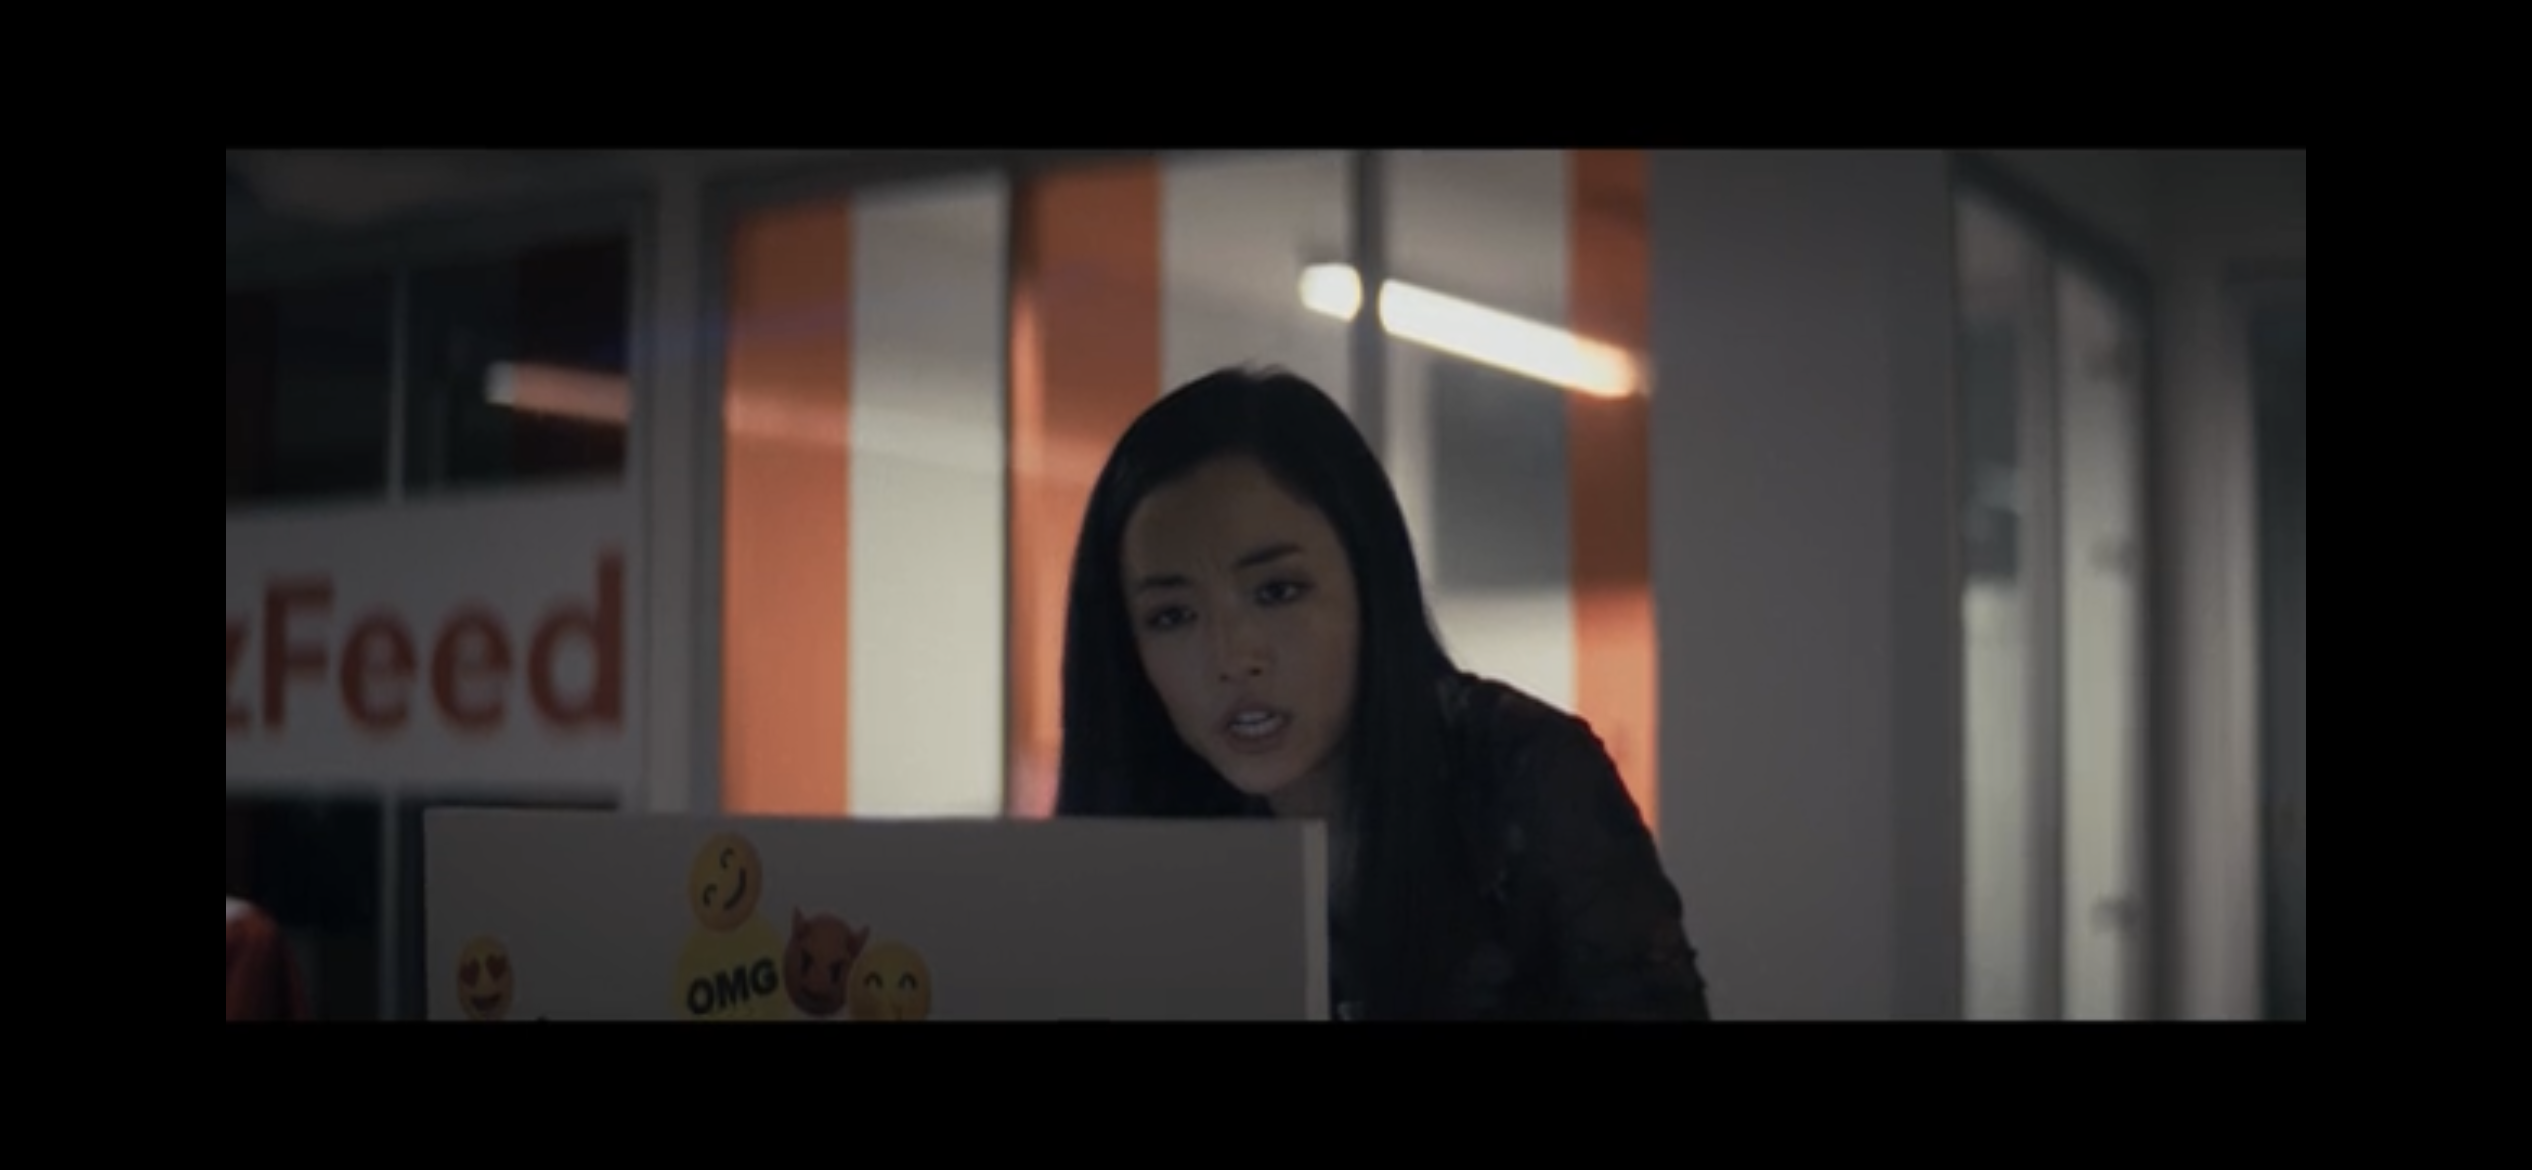 Andrea Bang as Evelyn looking at her computer screen with her mouth open